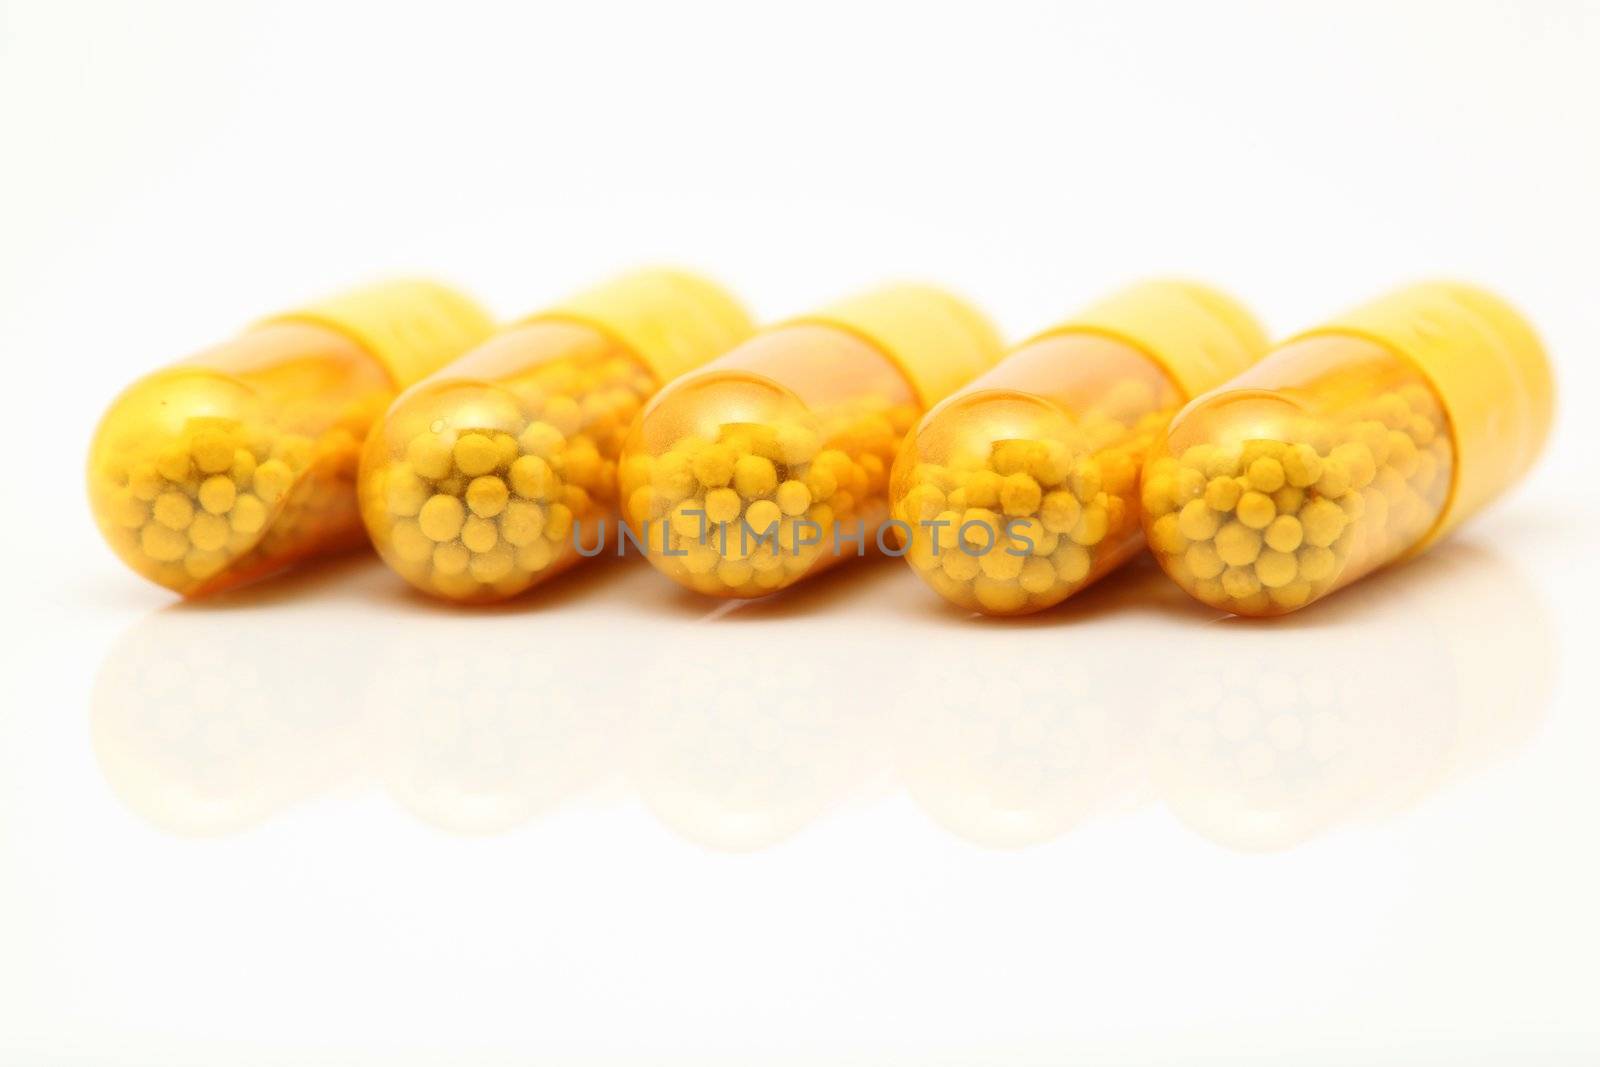 yellow medical capsules closeup detail with reflection on white background